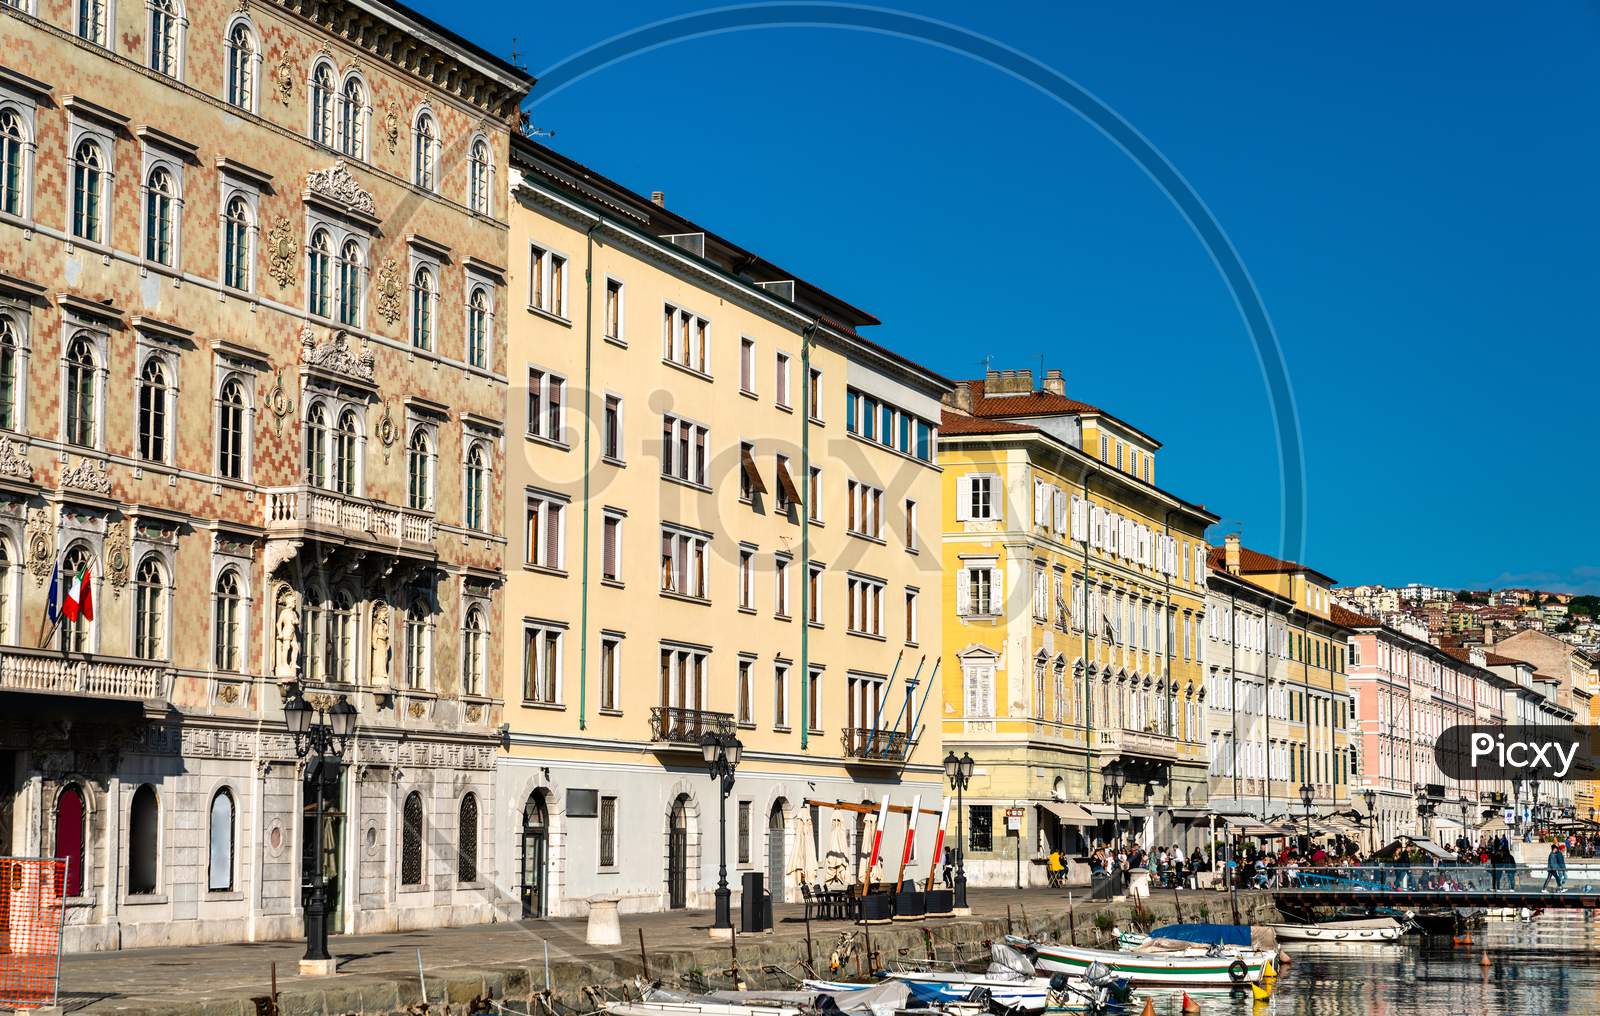 Historic Buildings In The City Centre Of Trieste, Italy